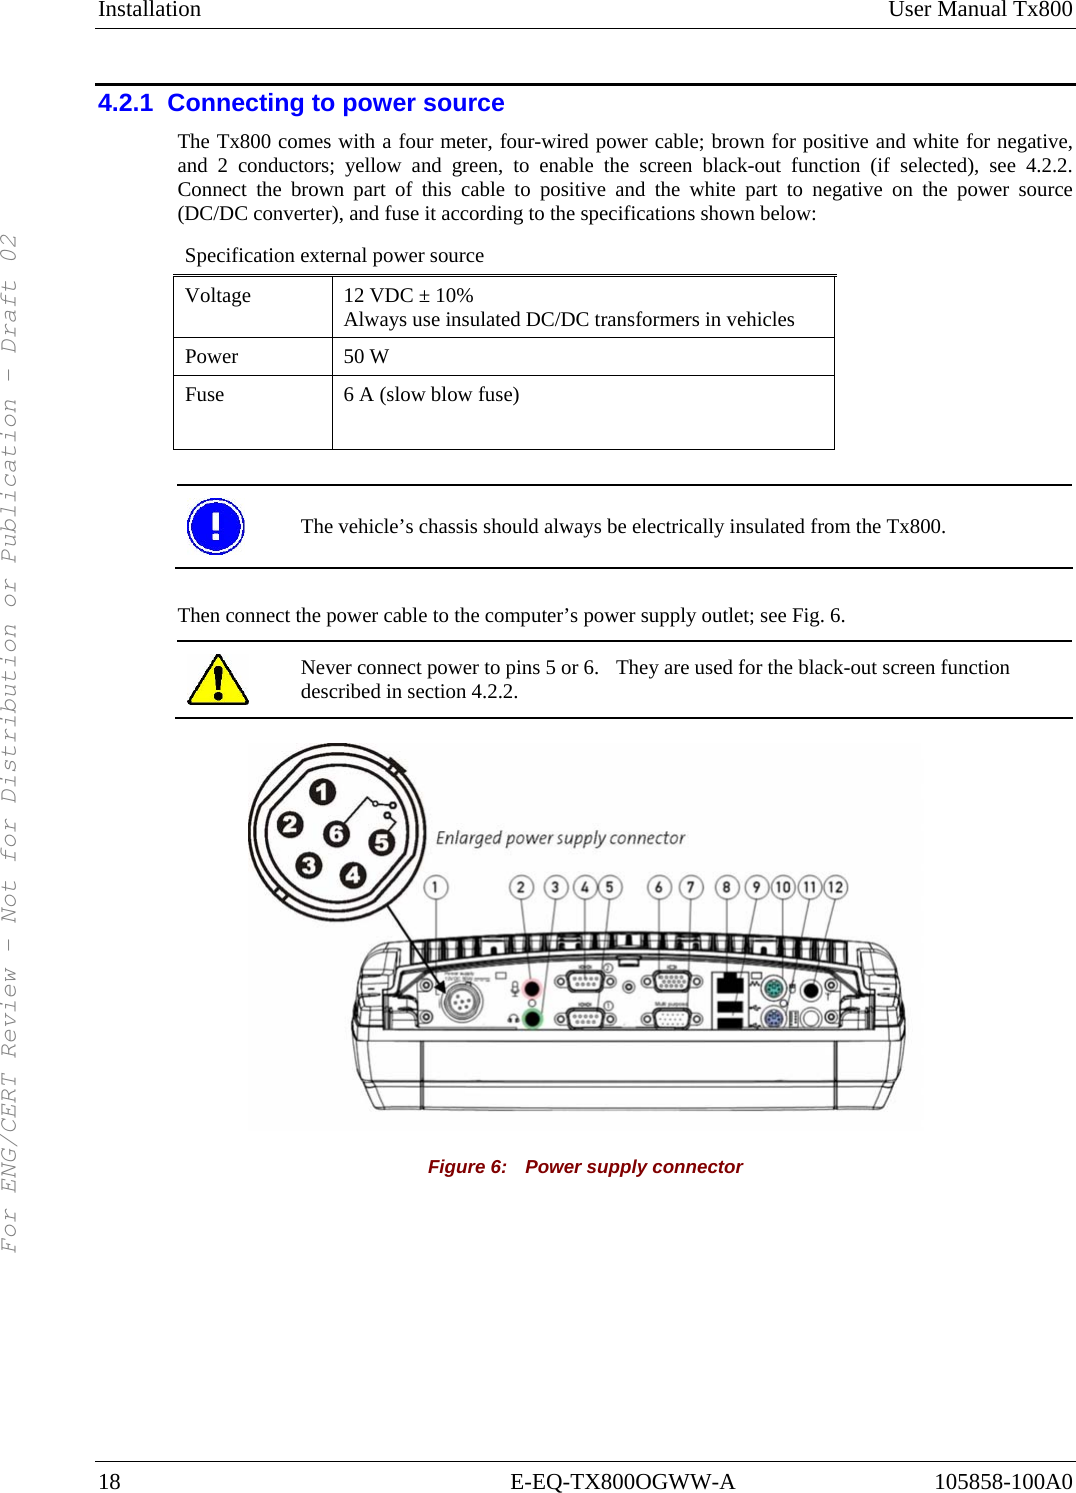 Installation User Manual Tx800 18 E-EQ-TX800OGWW-A 105858-100A0 4.2.1  Connecting to power source The Tx800 comes with a four meter, four-wired power cable; brown for positive and white for negative, and 2 conductors; yellow and green, to enable the screen black-out function (if selected), see 4.2.2. Connect the brown part of this cable to positive and the white part to negative on the power source (DC/DC converter), and fuse it according to the specifications shown below: Specification external power source Voltage  12 VDC ± 10%  Always use insulated DC/DC transformers in vehicles Power 50 W  Fuse  6 A (slow blow fuse)    The vehicle’s chassis should always be electrically insulated from the Tx800.  Then connect the power cable to the computer’s power supply outlet; see Fig. 6.  Never connect power to pins 5 or 6.  They are used for the black-out screen function described in section 4.2.2.  Figure 6:    Power supply connector For ENG/CERT Review - Not for Distribution or Publication - Draft 02